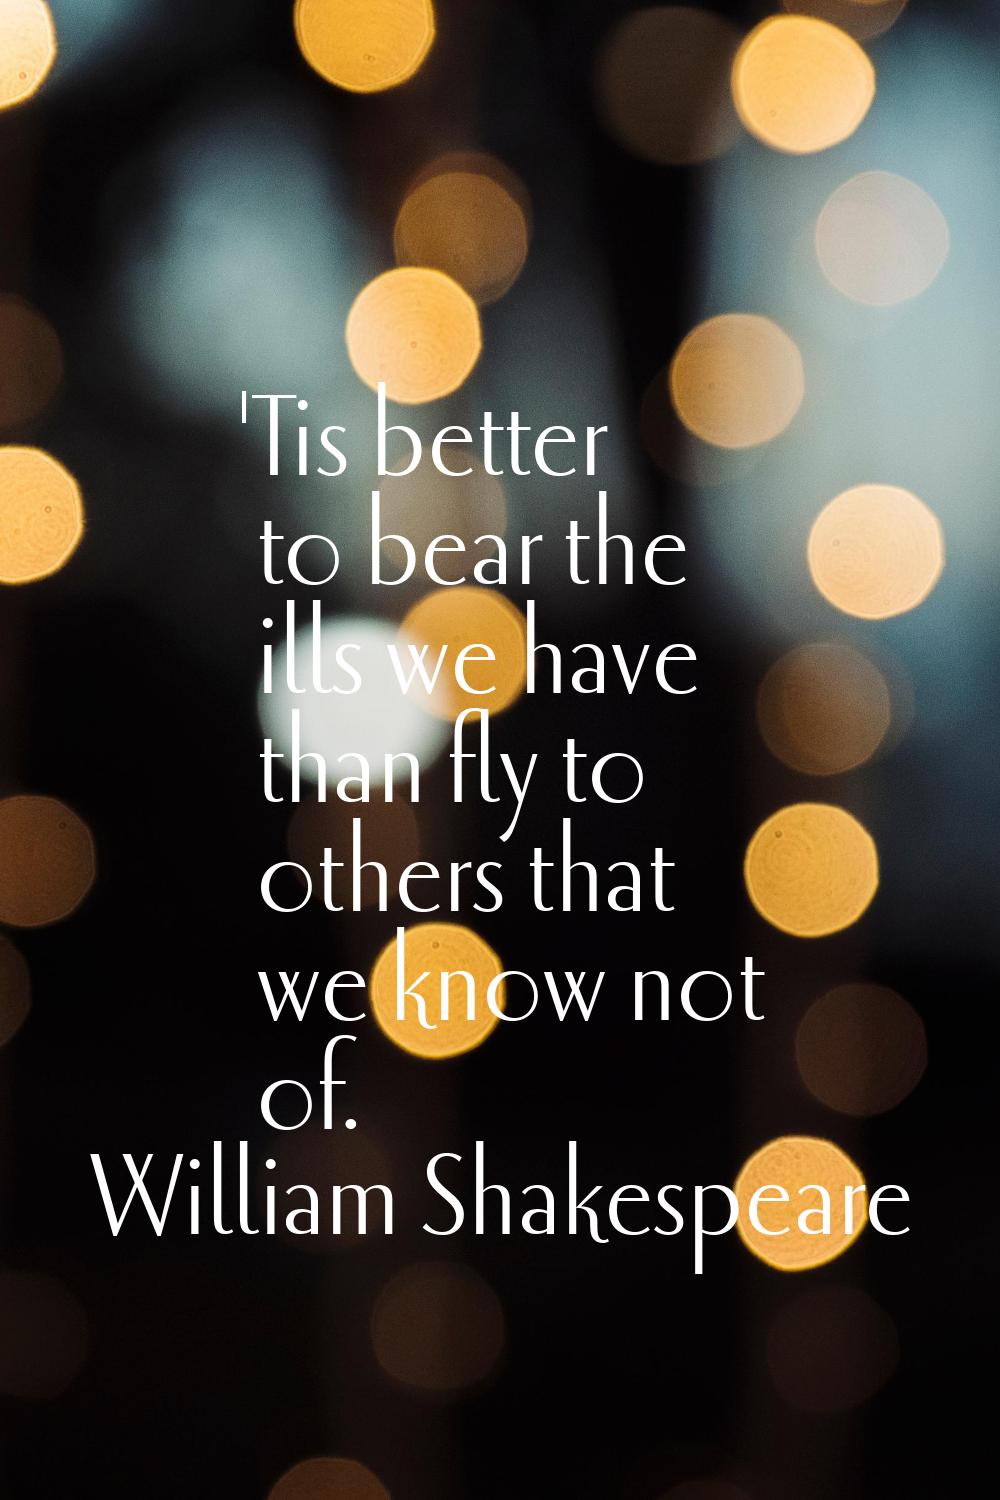 'Tis better to bear the ills we have than fly to others that we know not of.